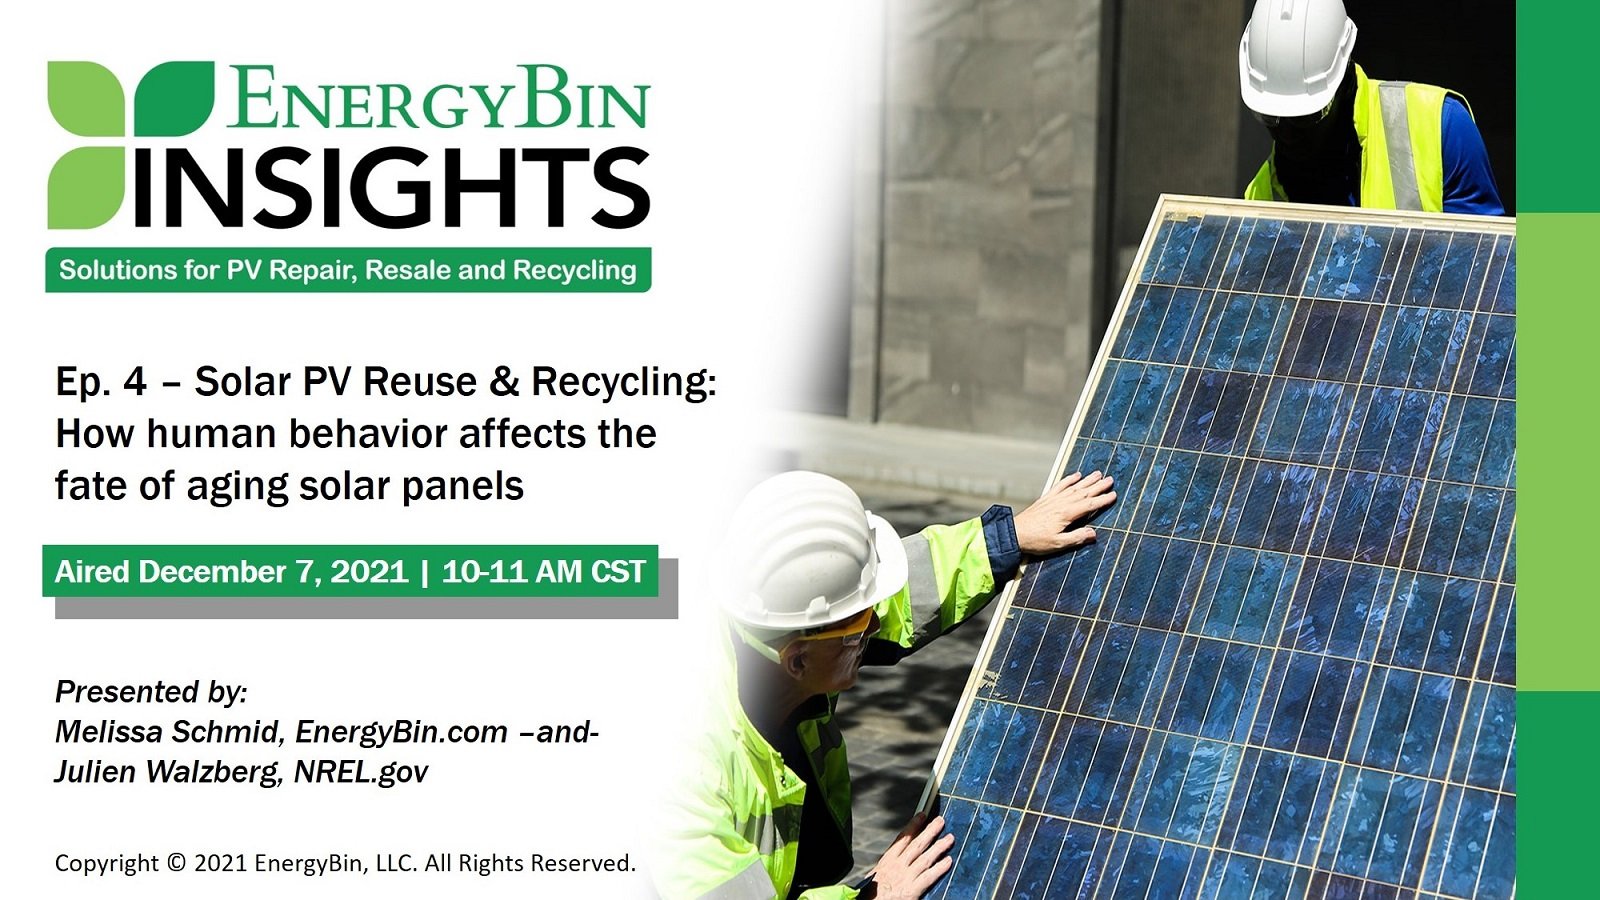 EB Insights Episode 4 - Solar PV Reuse and Recycling